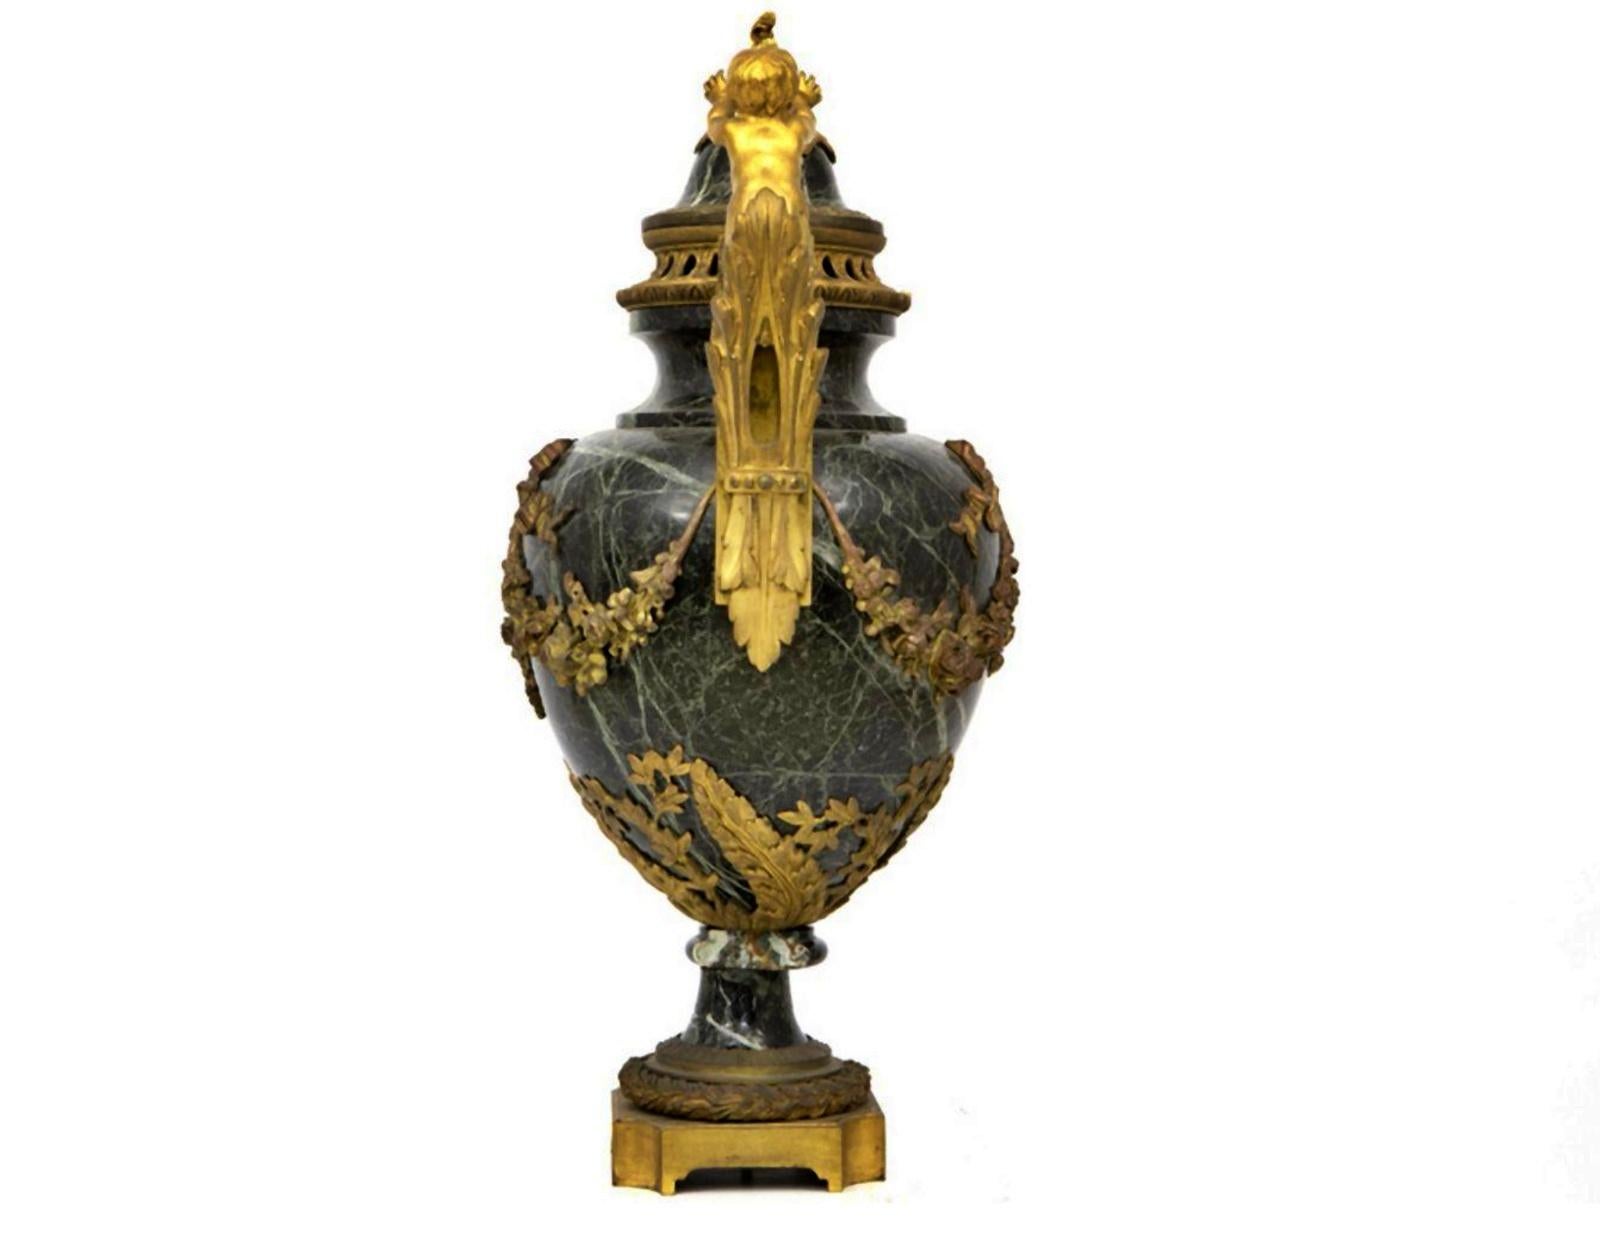 Amazing Antique Italian large lidded cassolet vase 19th century
In green marble with a beautiful frame in decorated bronze (including children and garlands) - height: 66 cm 
Very good condition.